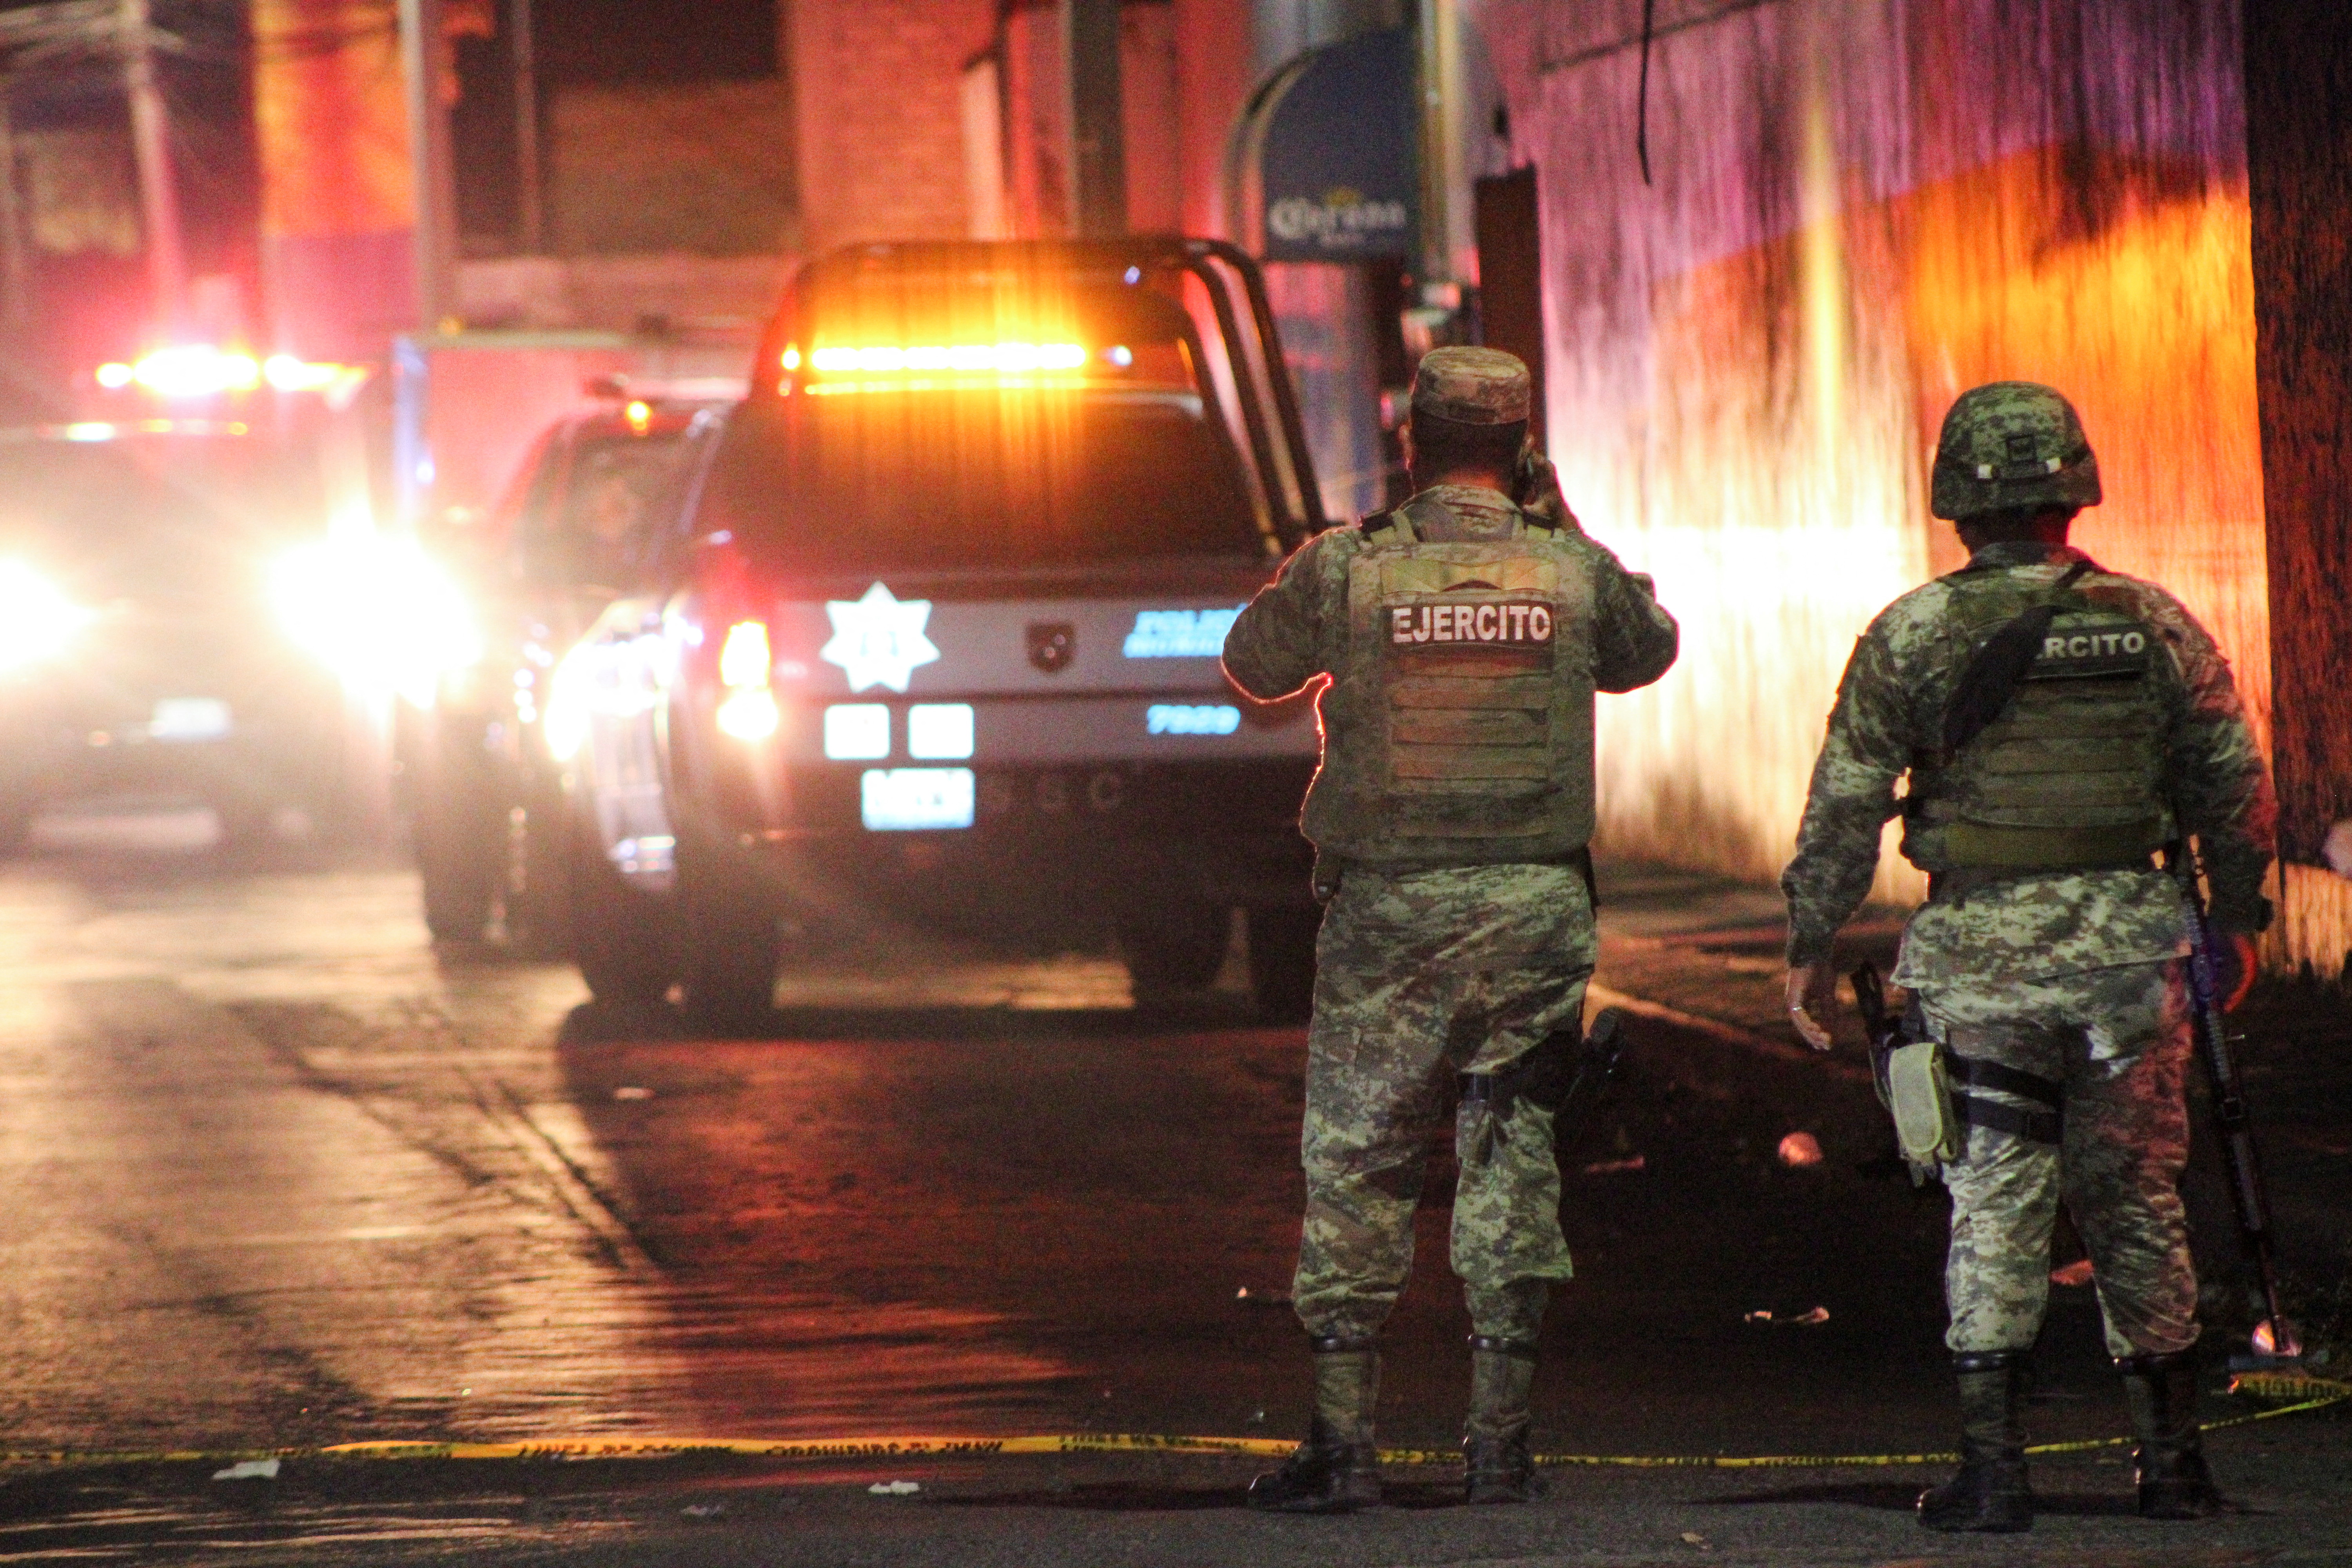 Security forces guard the scene where gunmen attacked bars and killed people, in Celaya